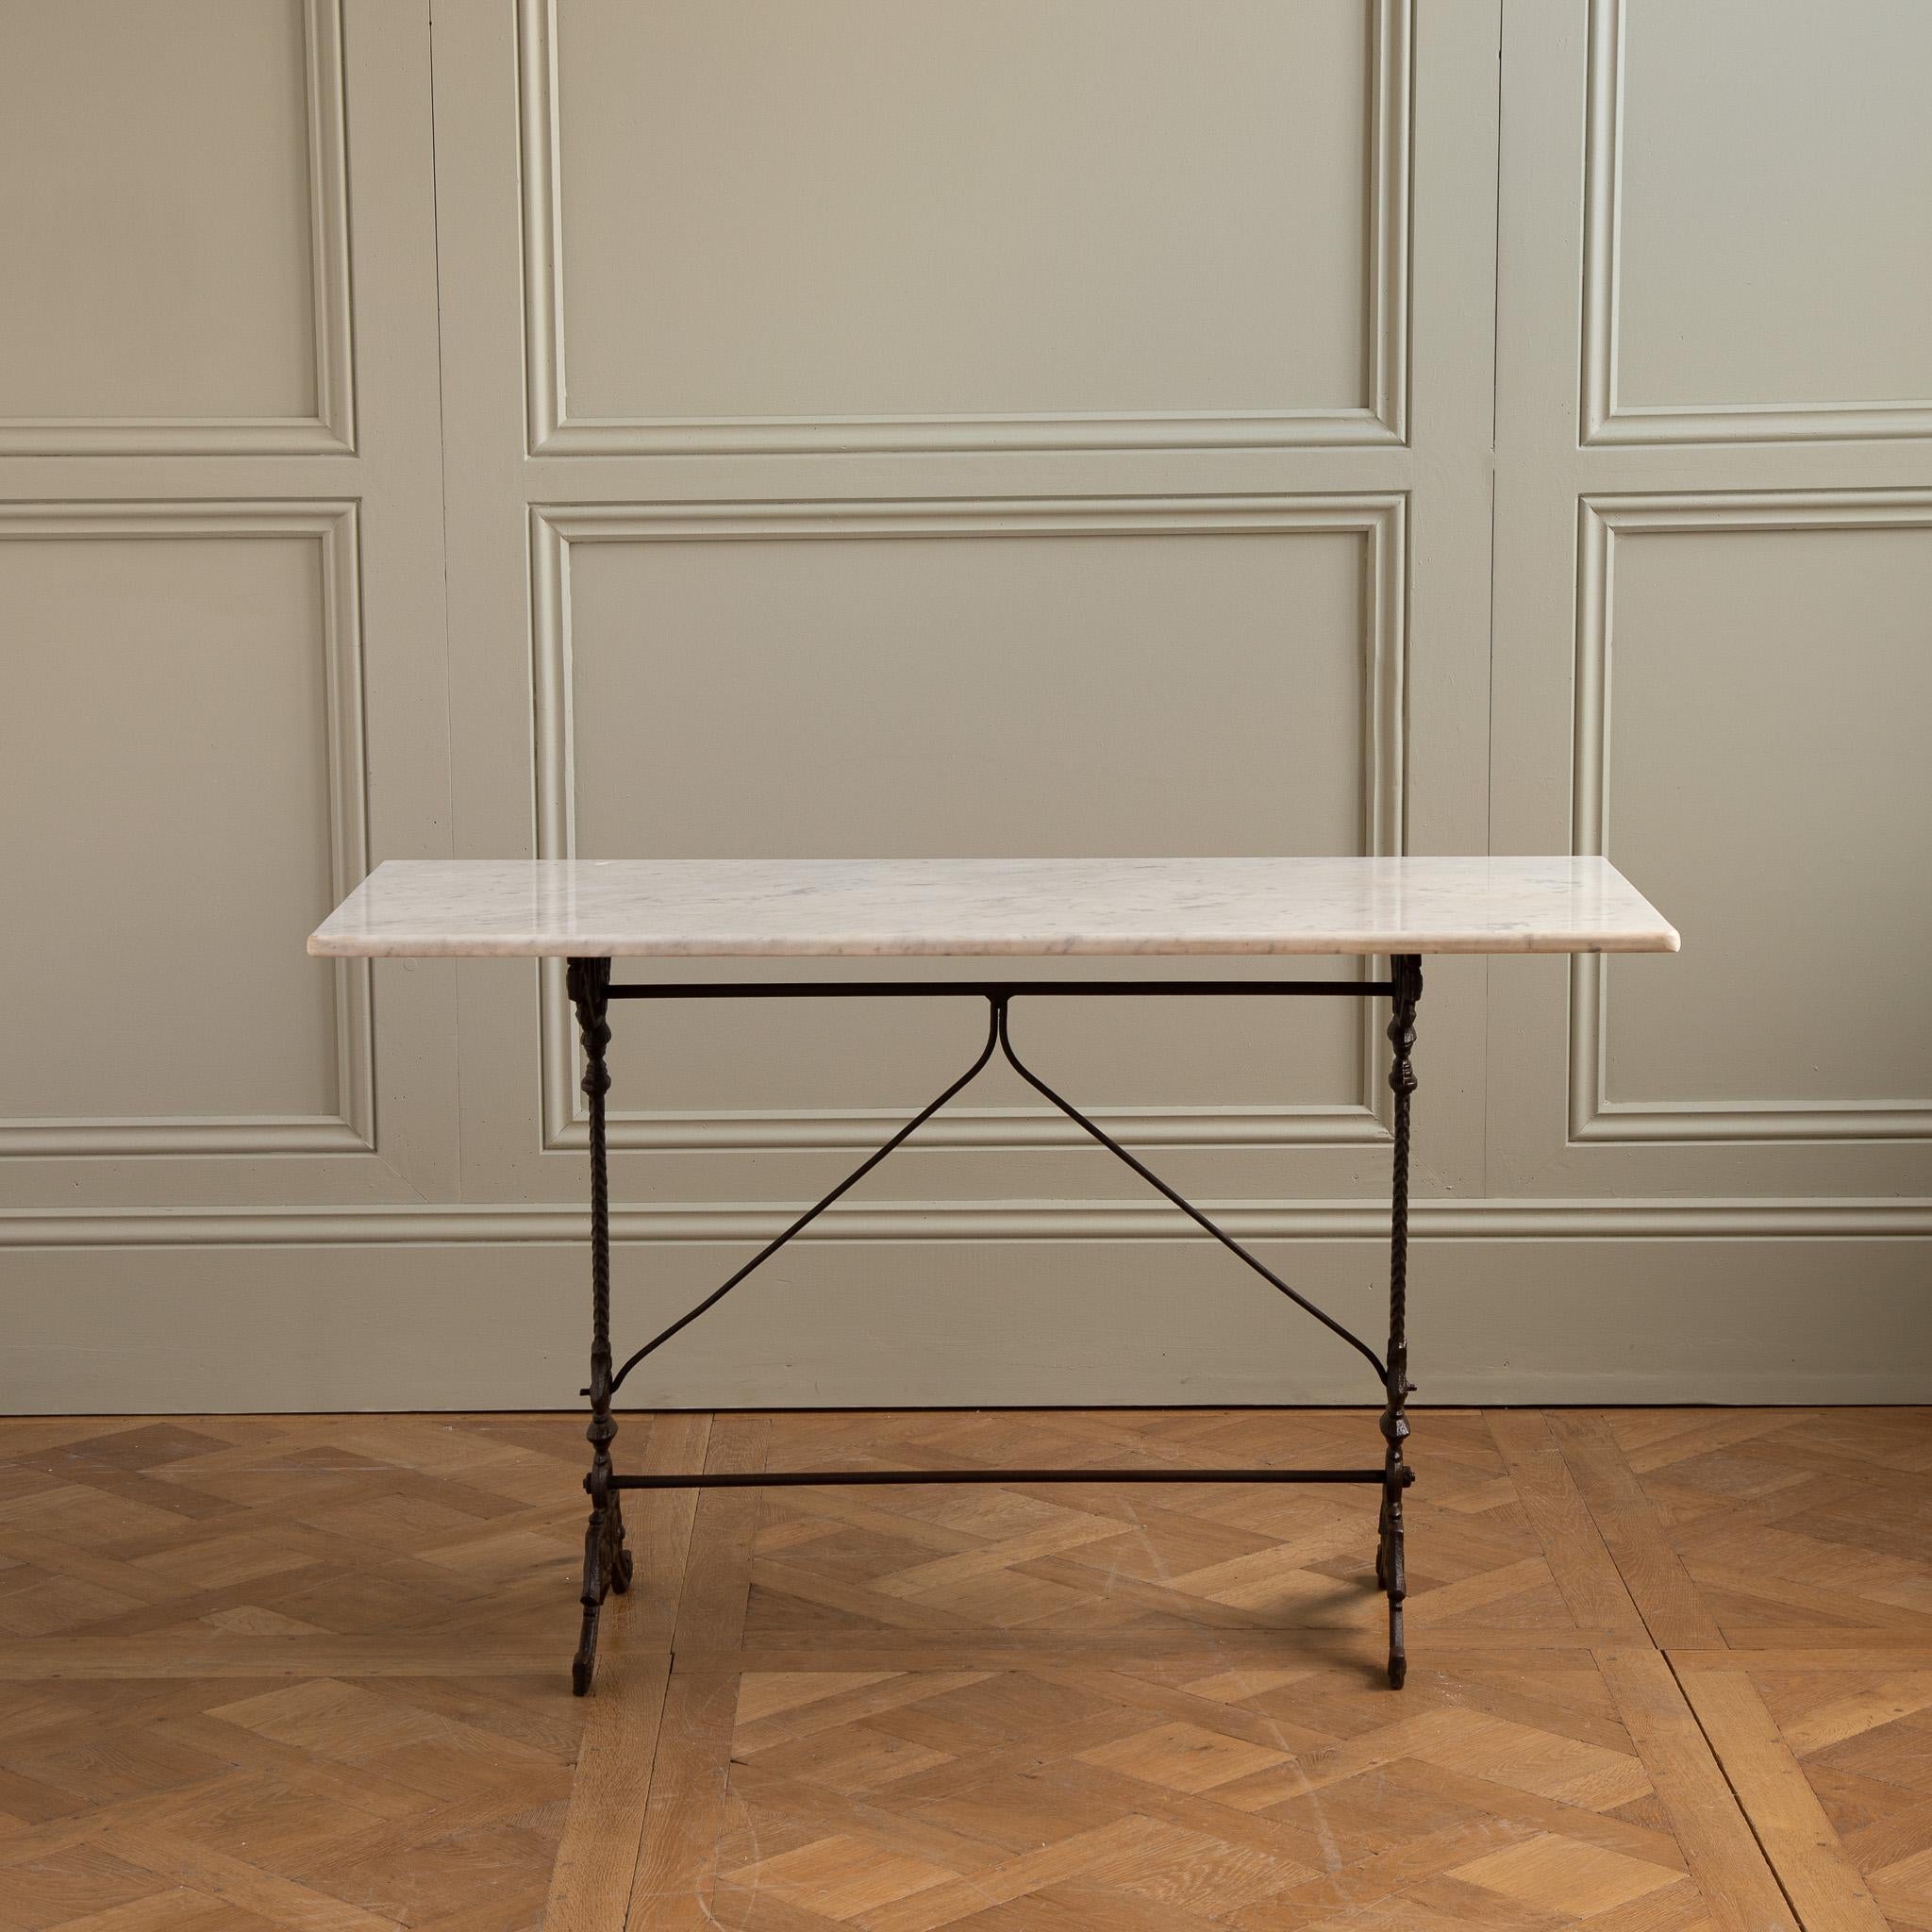 Cast iron Bistro table from the Art nouveau period with a Carrara marble top.
 